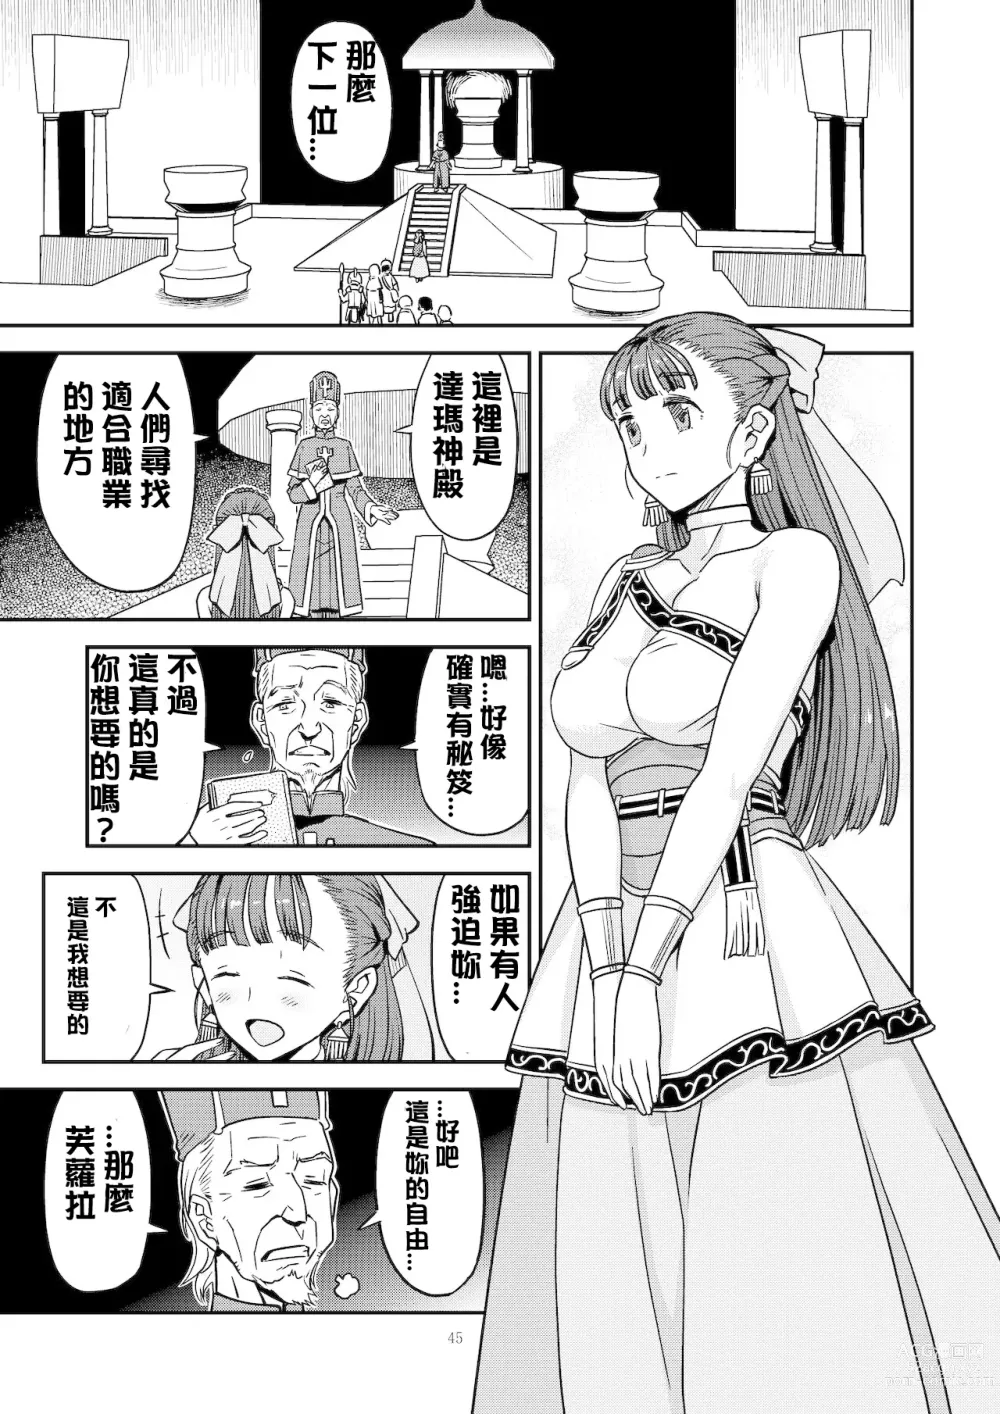 Page 2 of doujinshi Dragon Quest One Thousand and One Nights (Dragon Quest) [Digital]  【Chinese】【QTE中文翻譯】